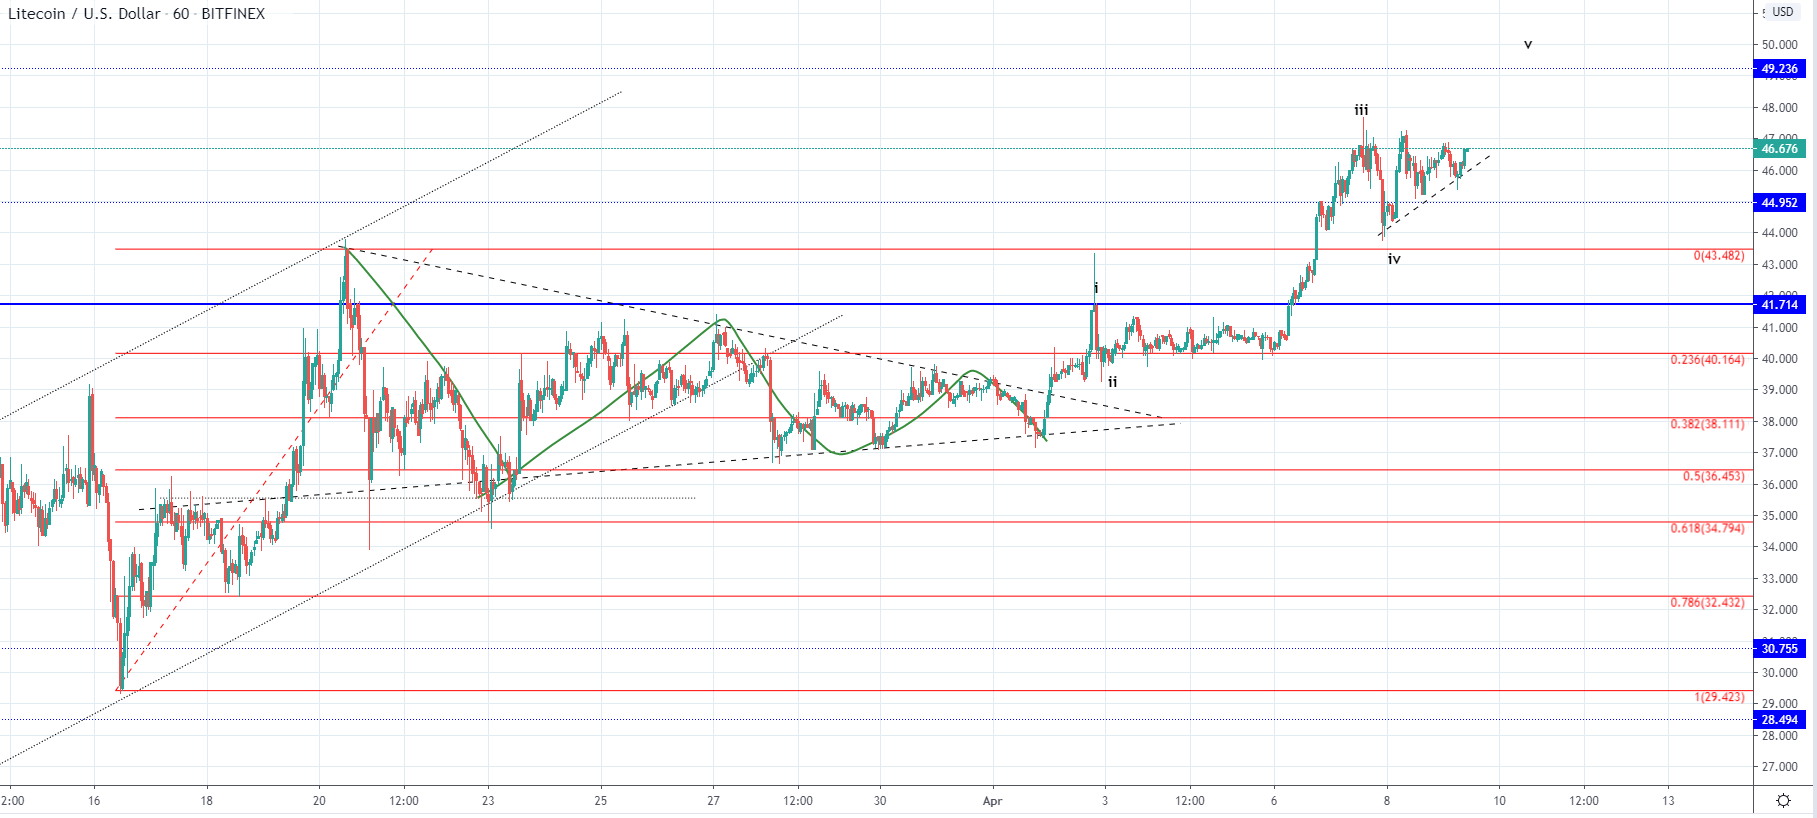 LTC and EOS - Breakout expected